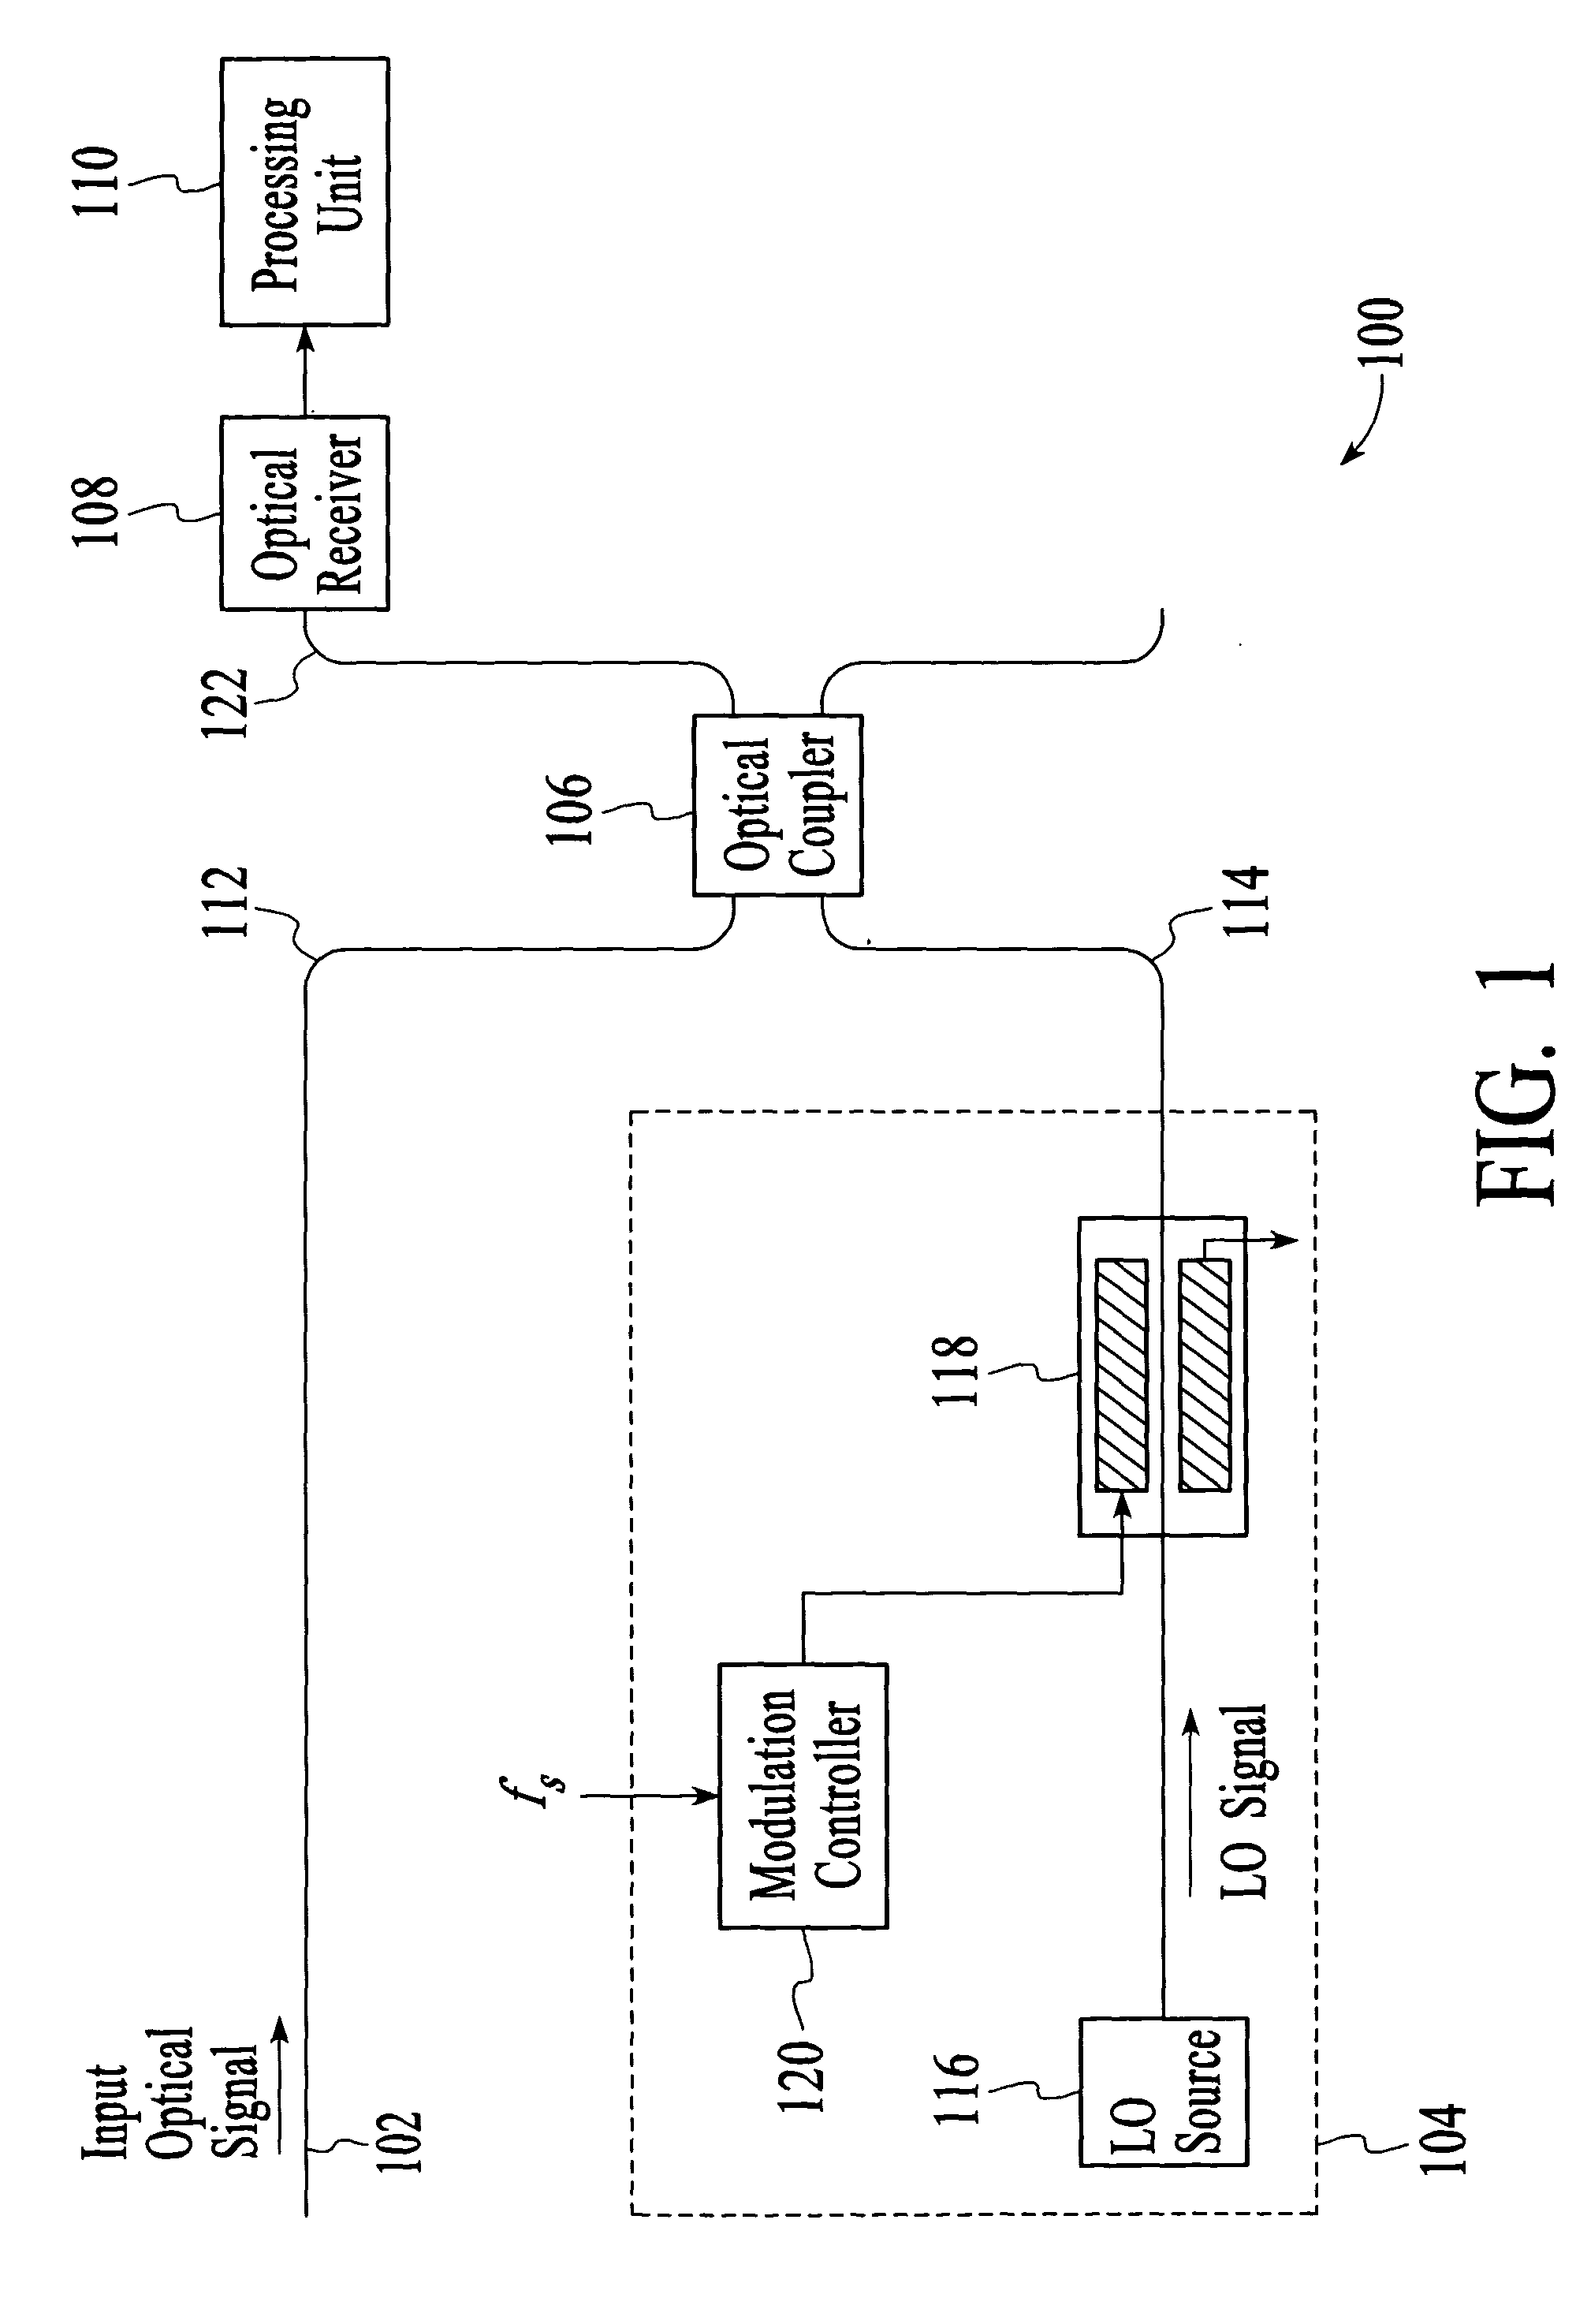 Optical analyzer and method for measuring spectral amplitude and phase of input optical signals using heterodyne architecture